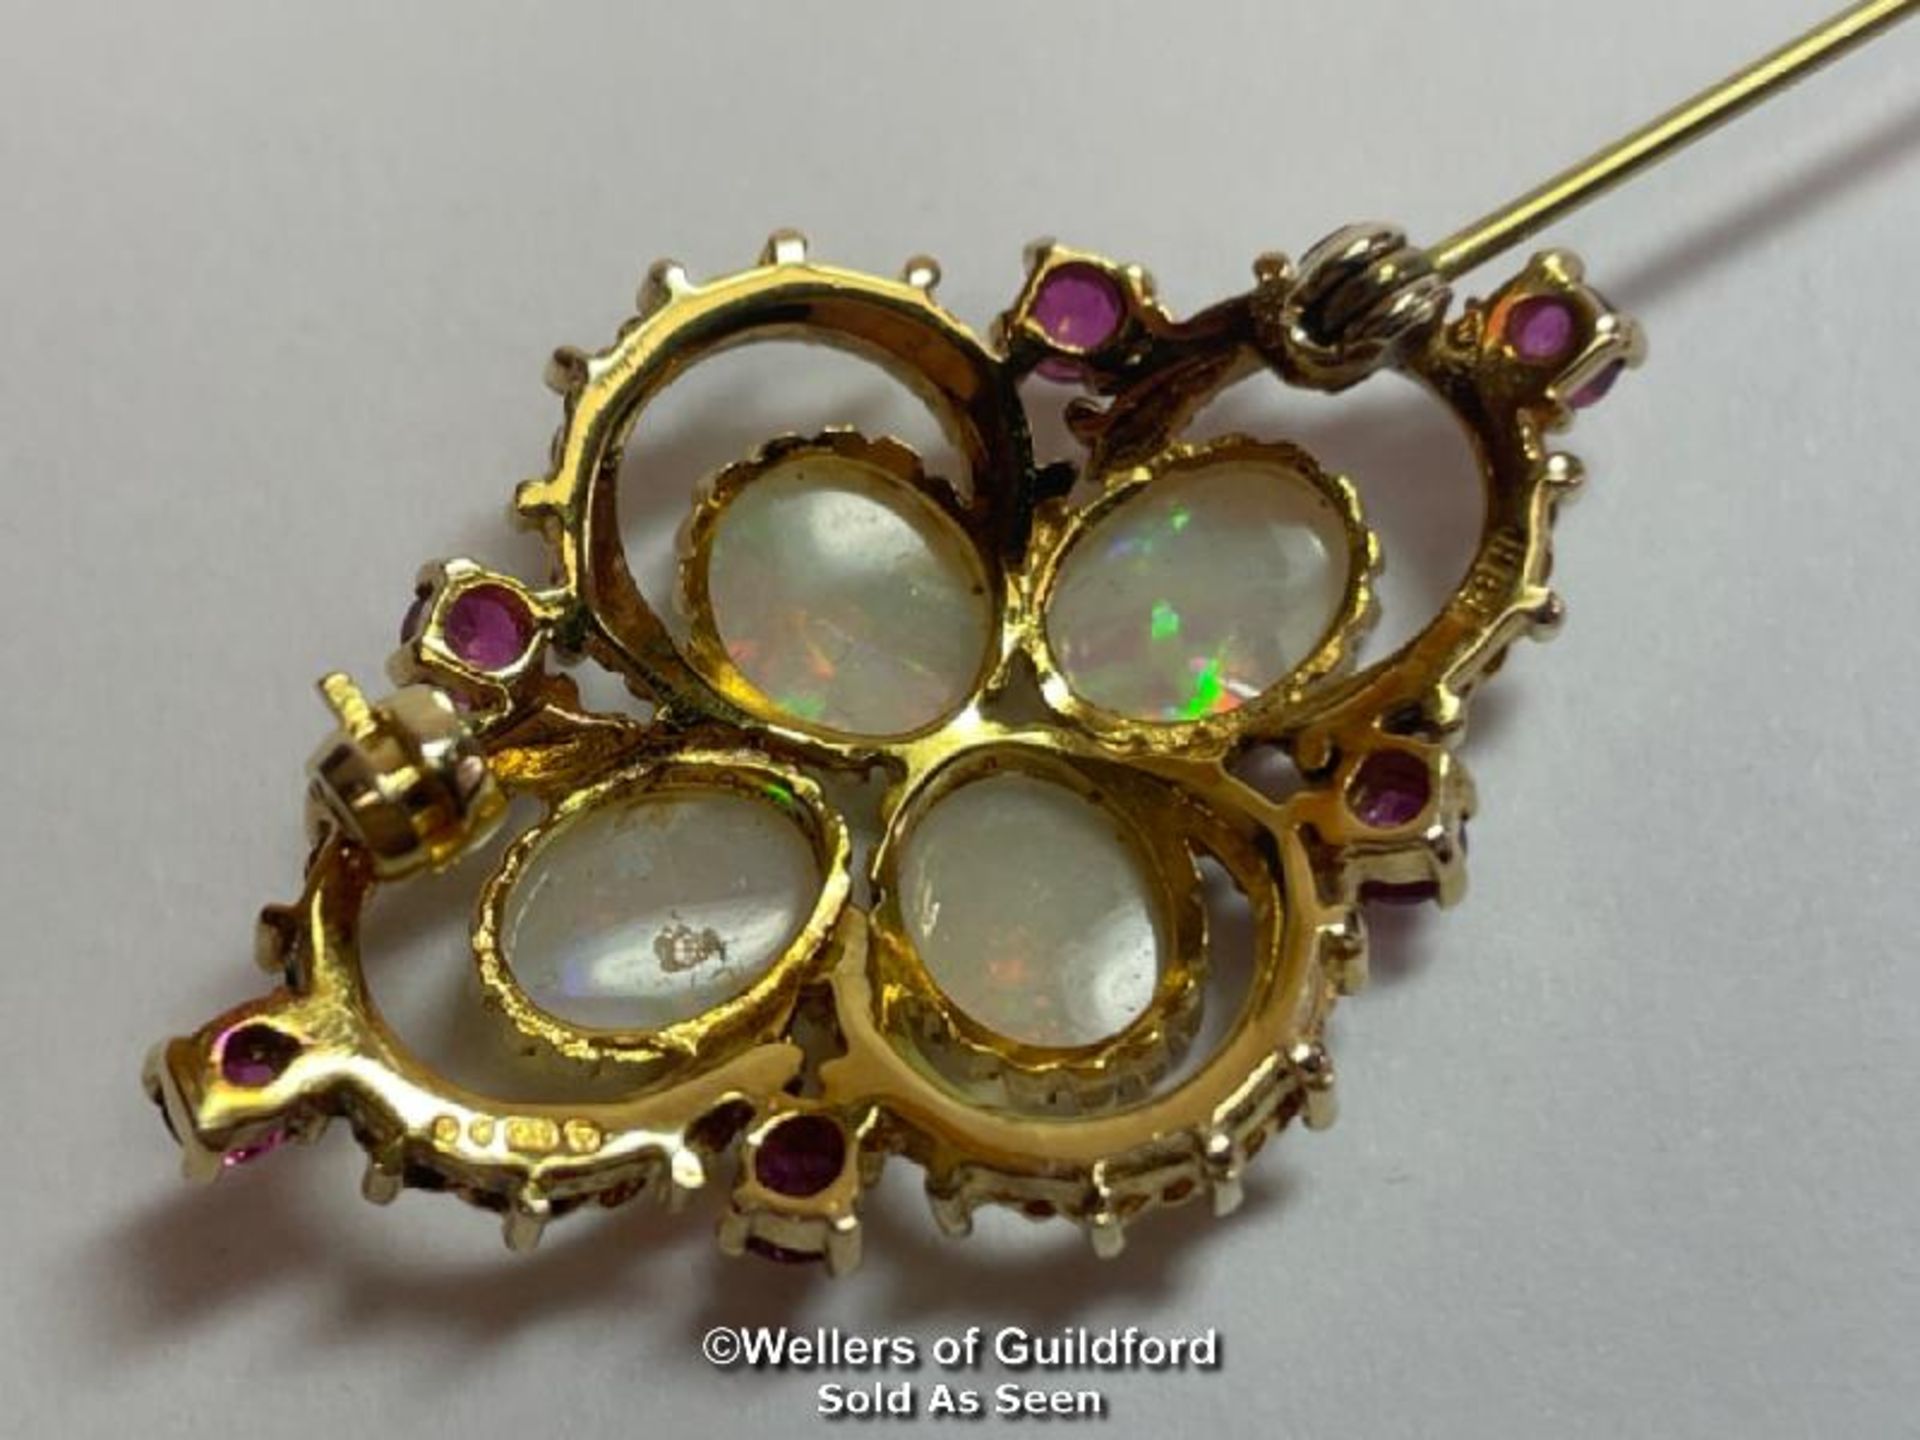 Opal and ruby quatrefoil brooch in 9ct gold. Opals measure approx 9mm x 7mm. Hallmarks for Sheffield - Image 2 of 5